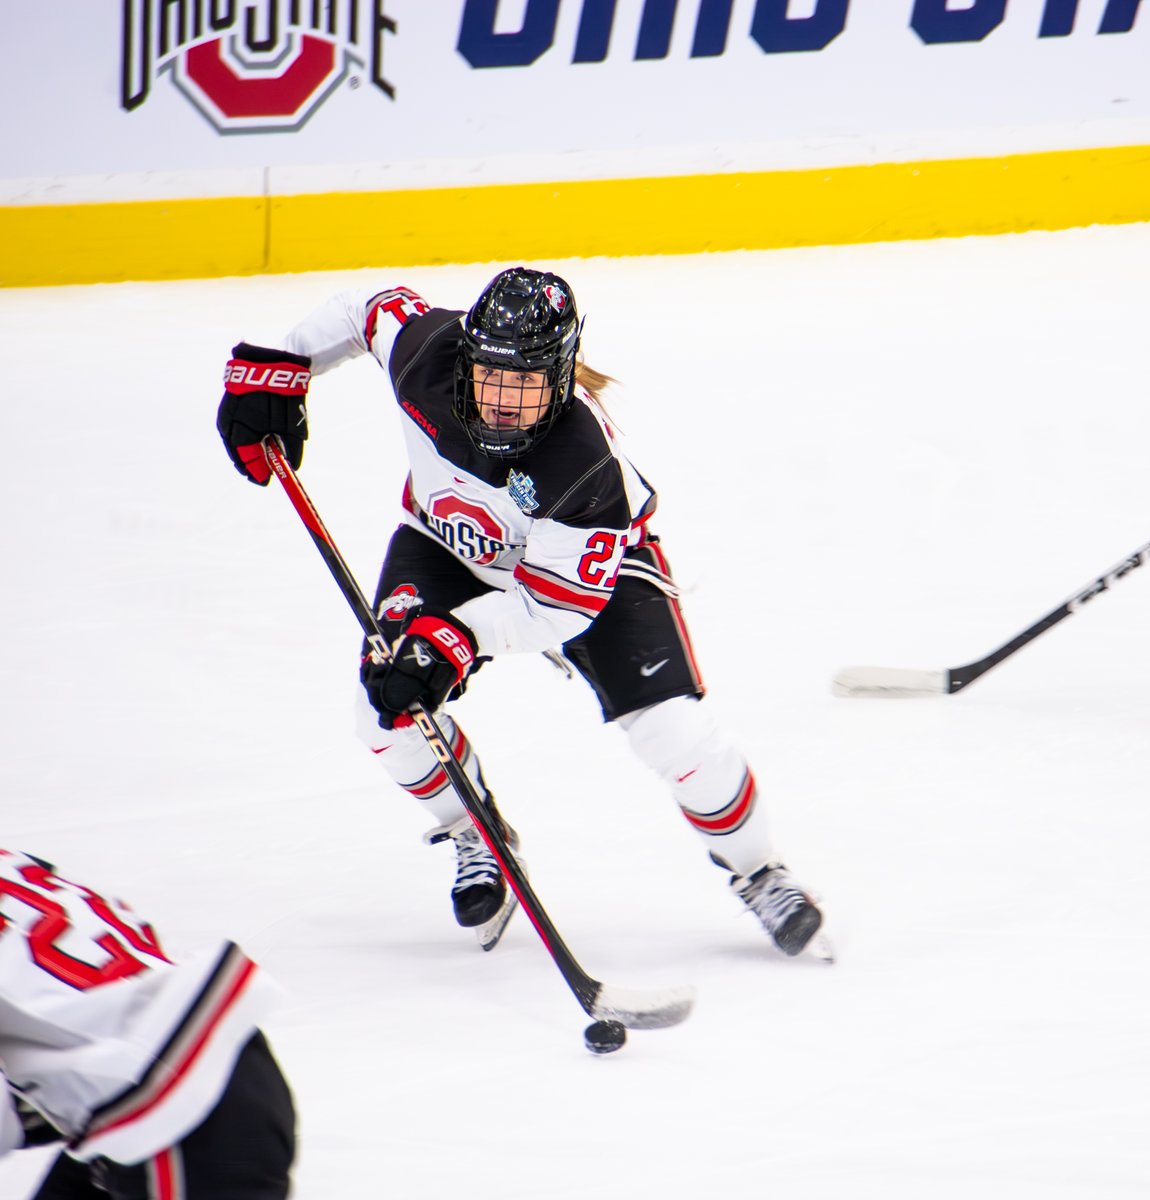 Our favorite “planker” KIara Zanon, during the Frozen Four Semi-Final game against Clarkson on March 22, 2024.

#gobucks #ohiostatewhky #wchahockey #womenshockey #buckeyehockey
#ncaawhockey #wfrozenfour #buckeyes